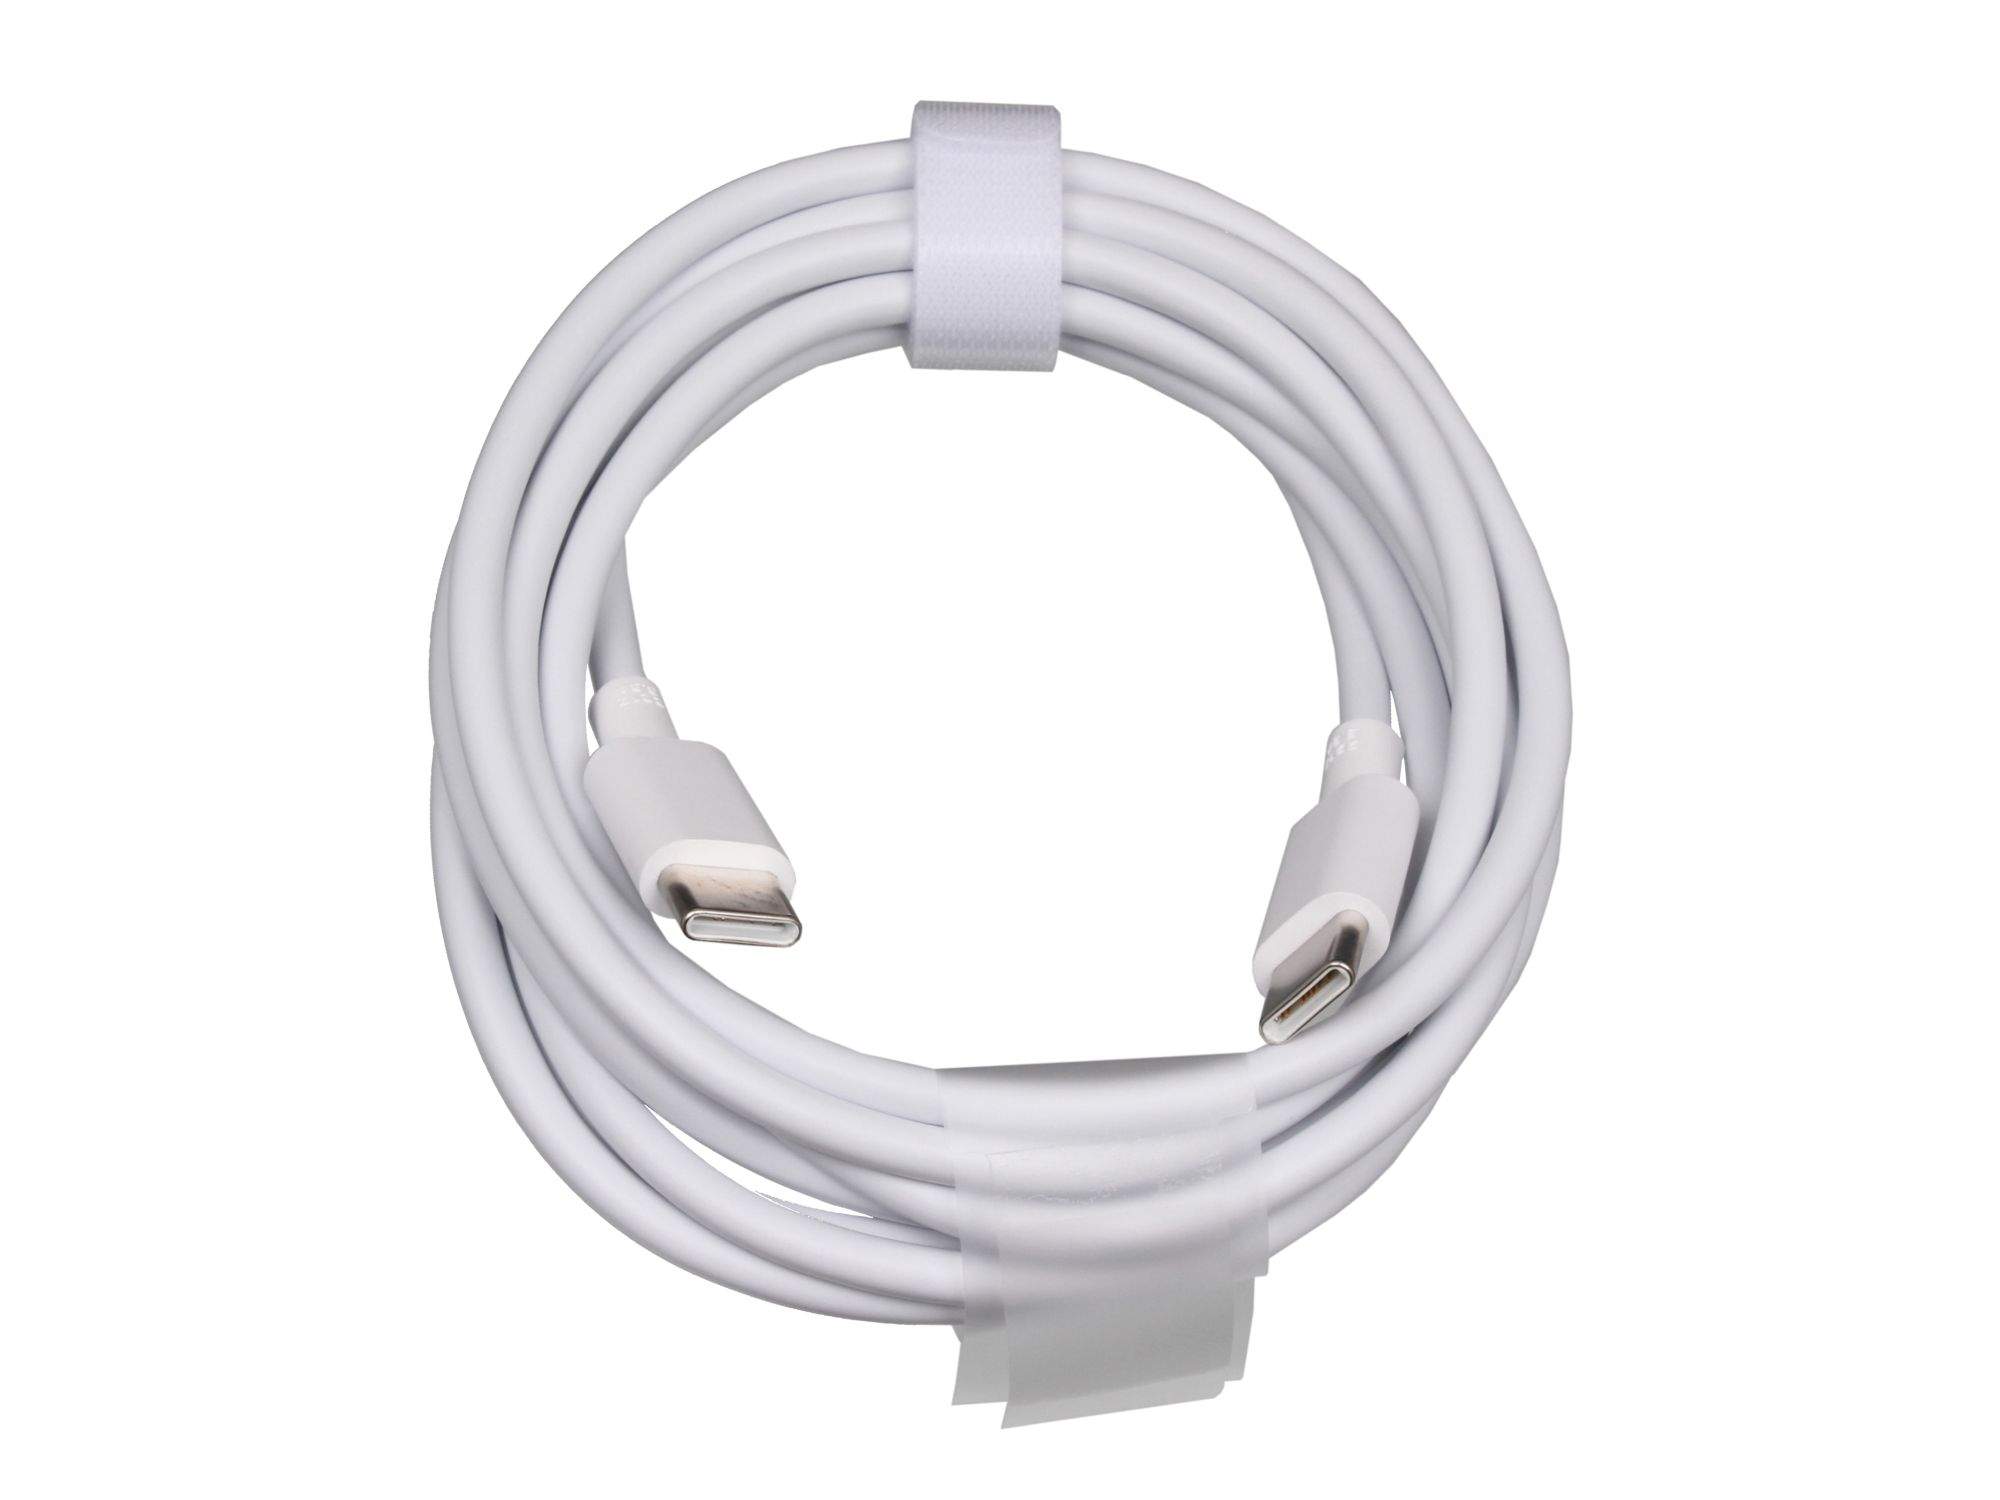 HUAWEI Charging Cable USB 2.0 Type C to C White 20